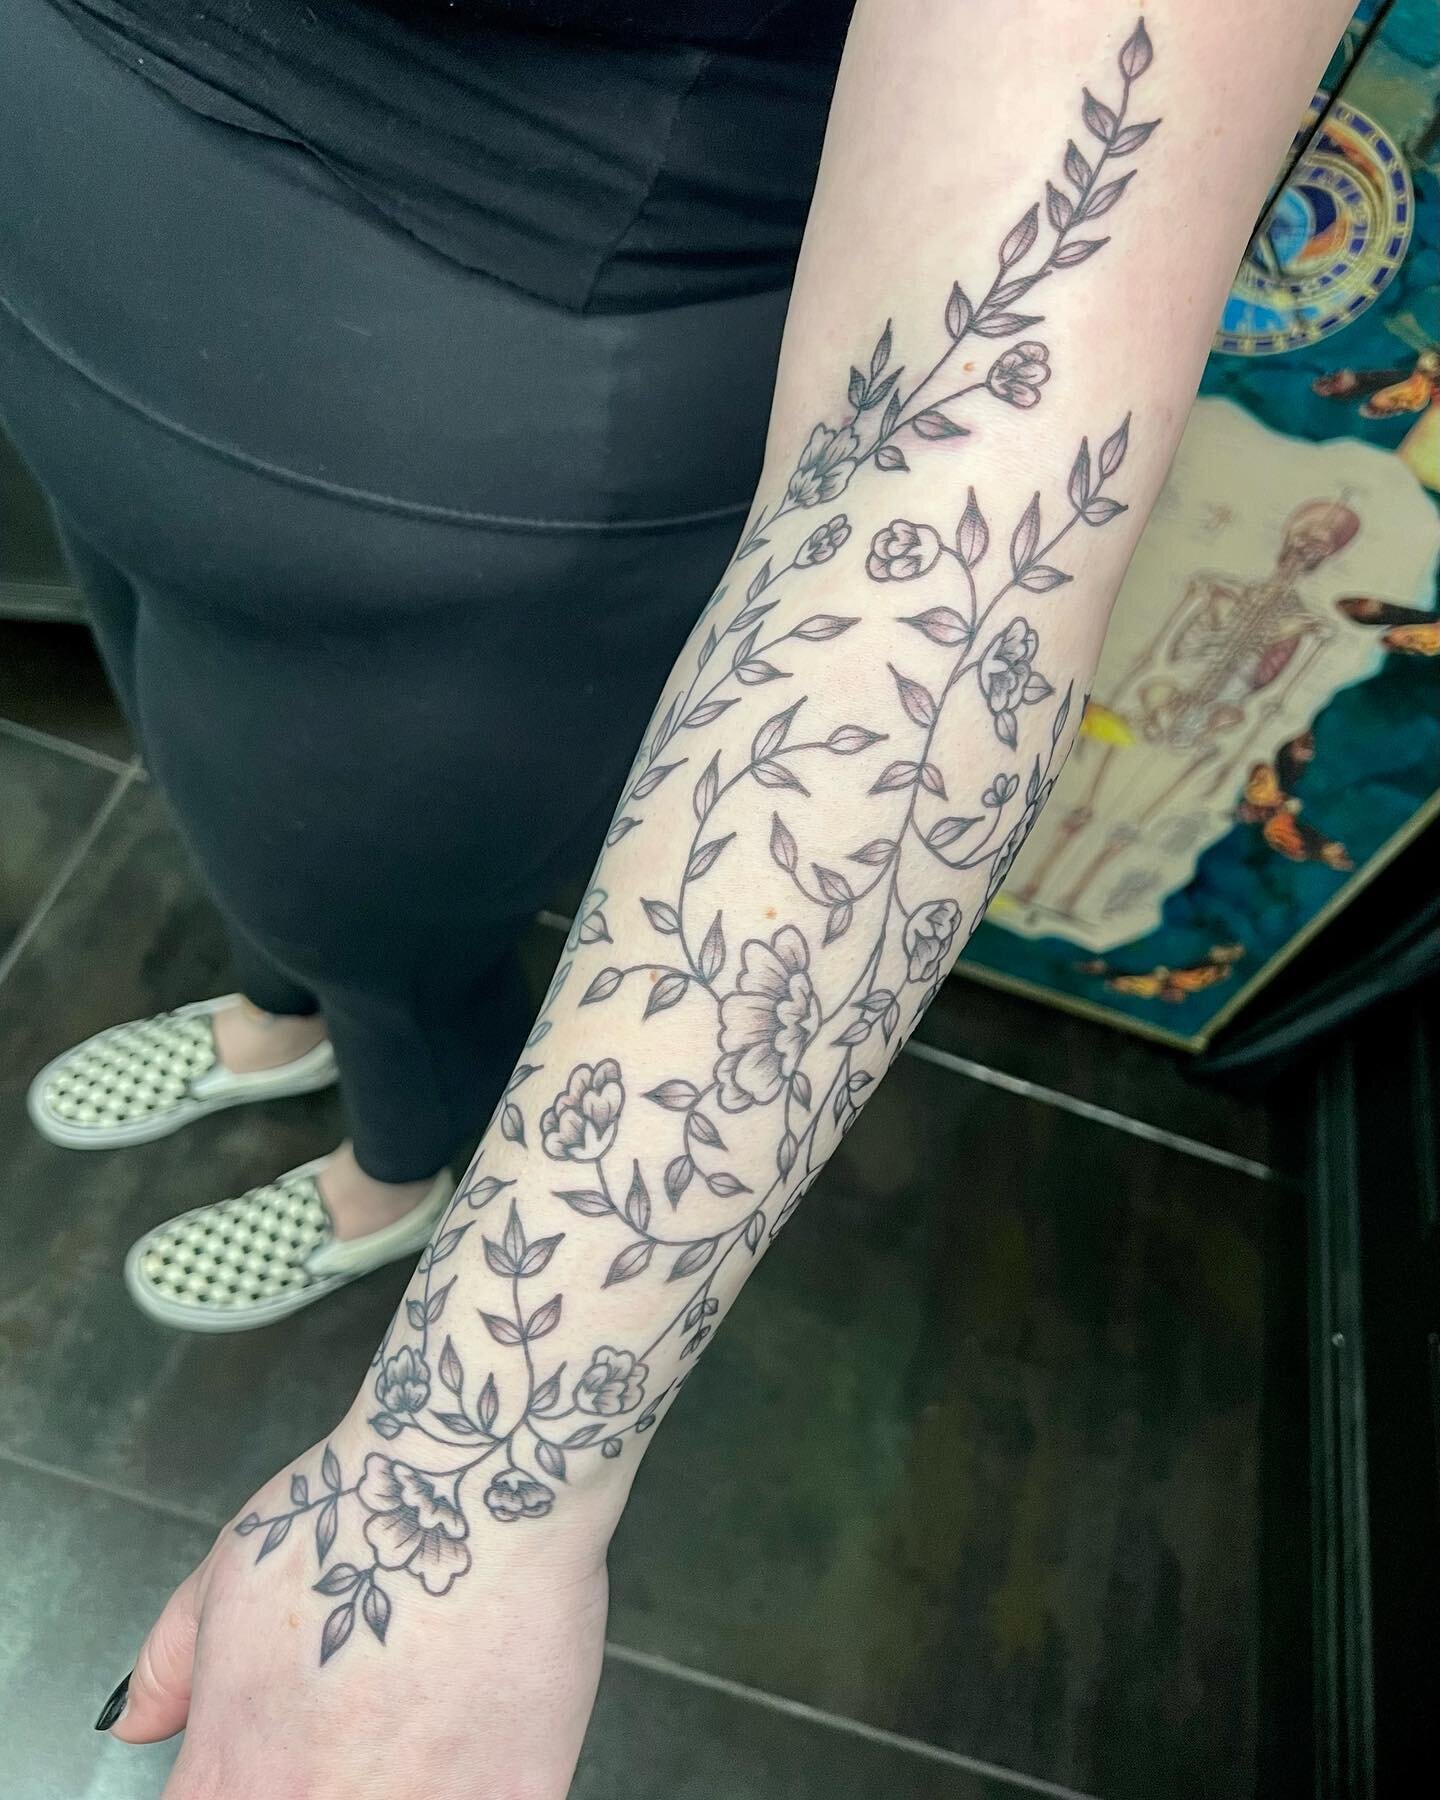 Partially freehand, partially stenciled vines and flowers for Taylor! I love that we were able to integrate the cat tattoo I did like 3 years ago. Thank you for letting me make this for you 🖤